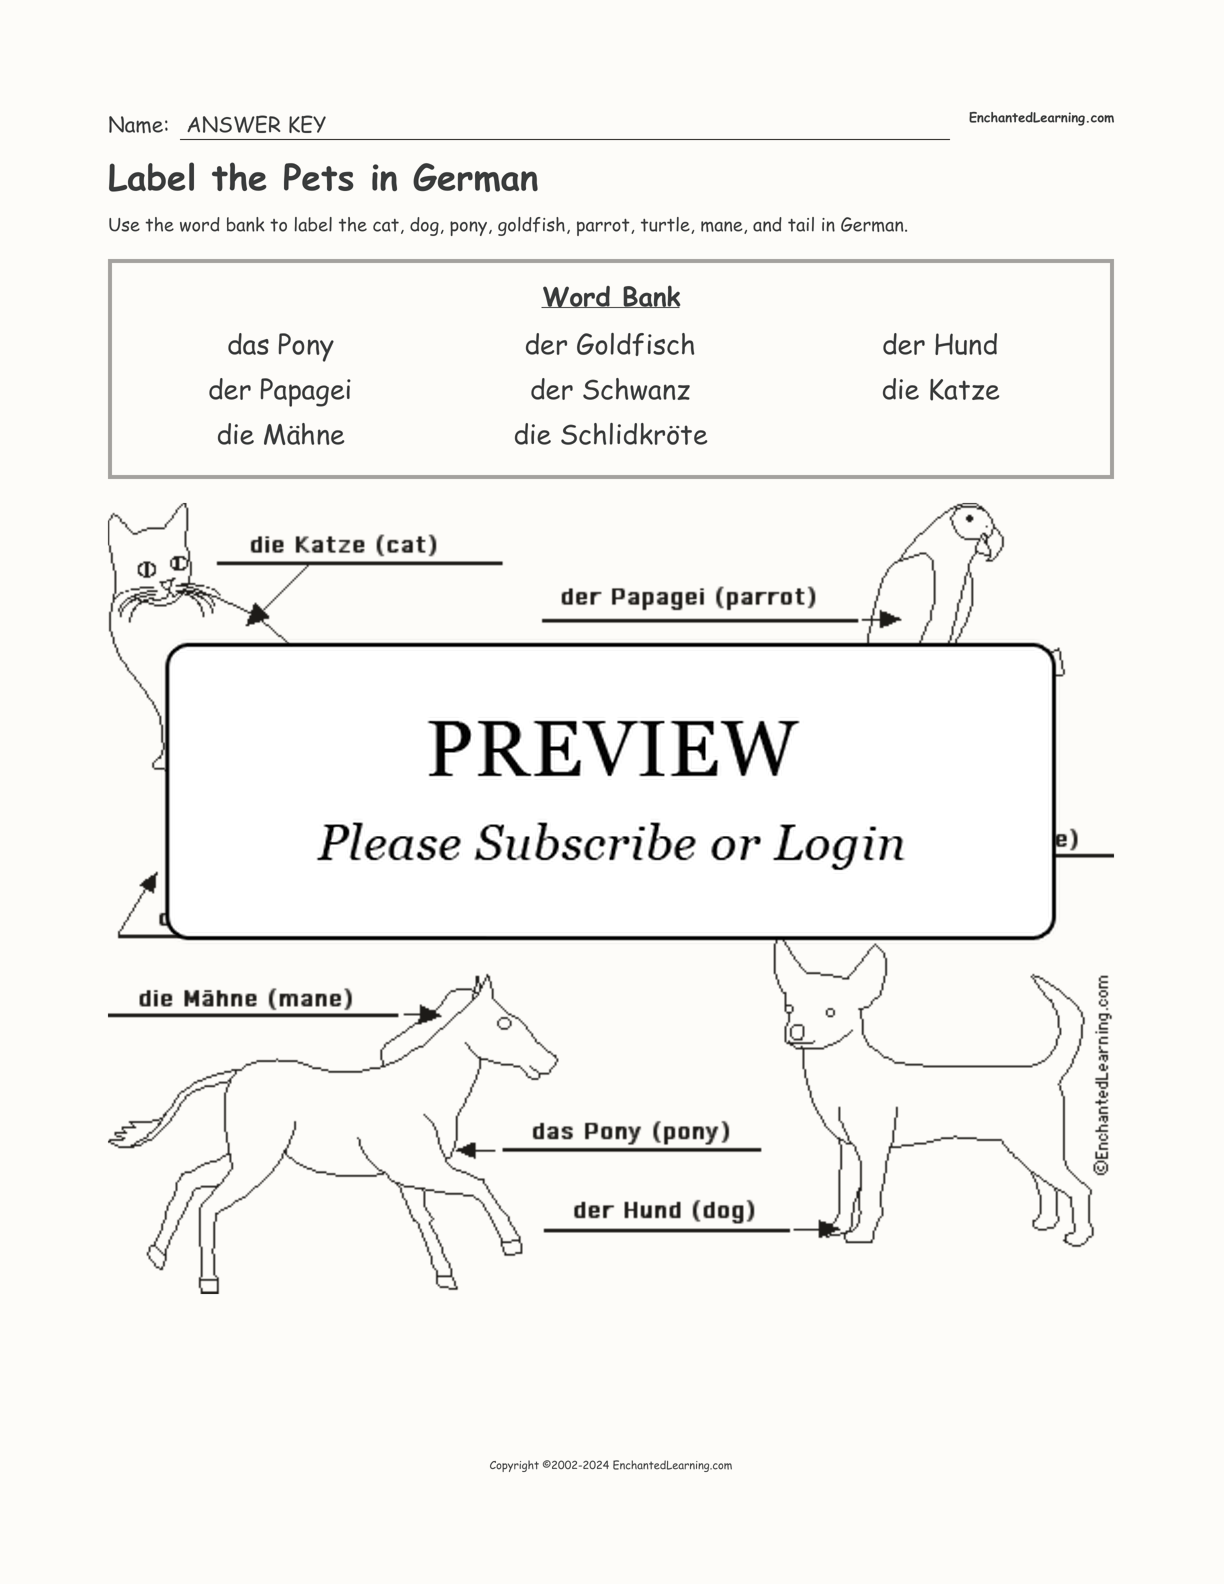 Label the Pets in German interactive worksheet page 2